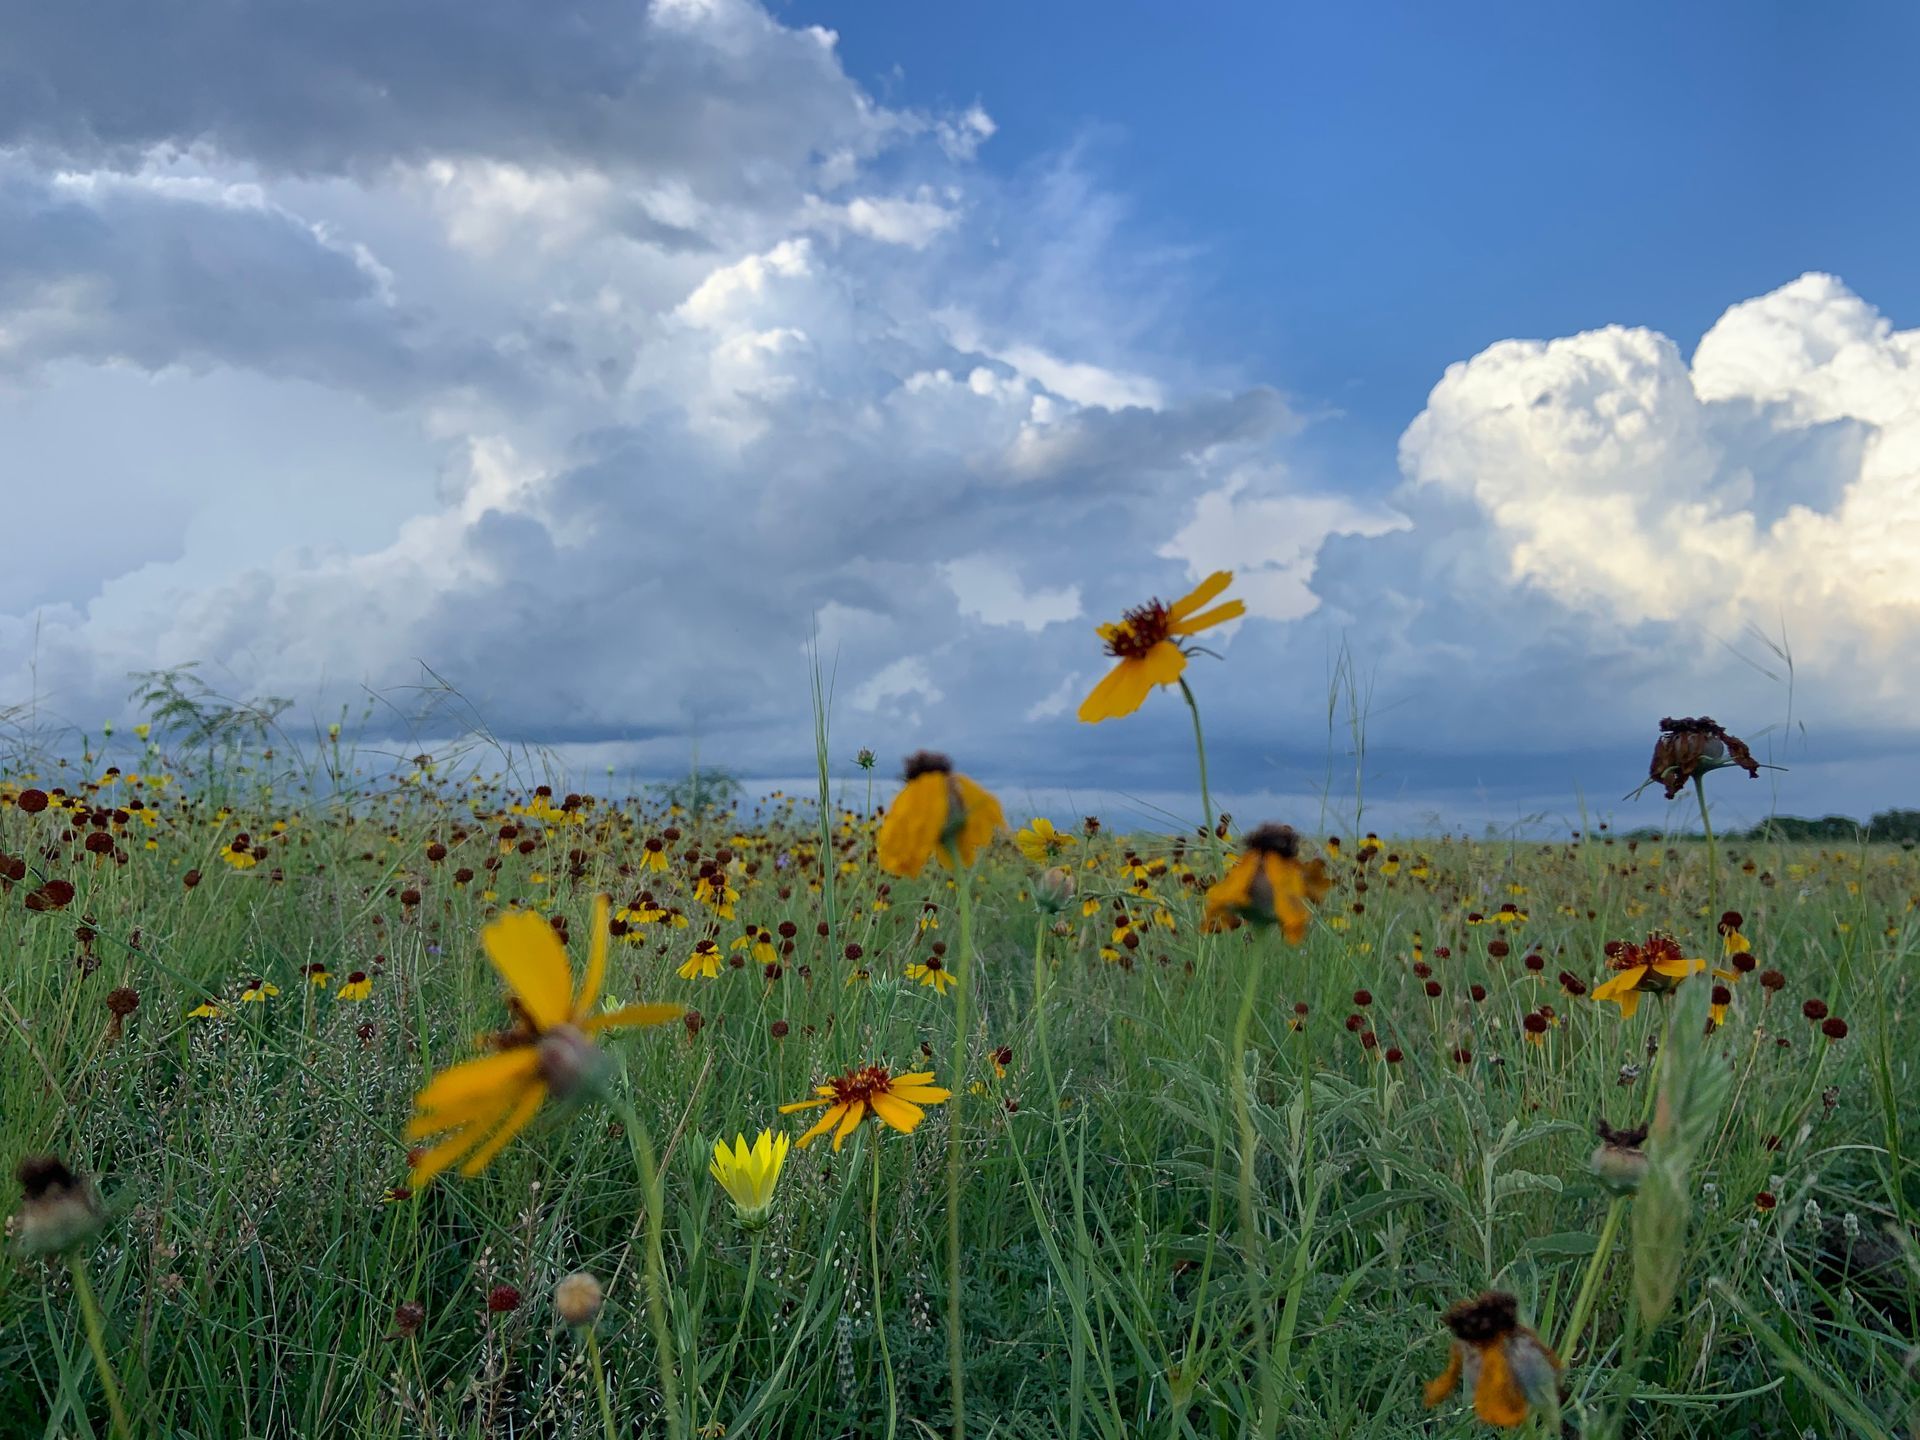 A field of yellow flowers with a cloudy sky in the background.